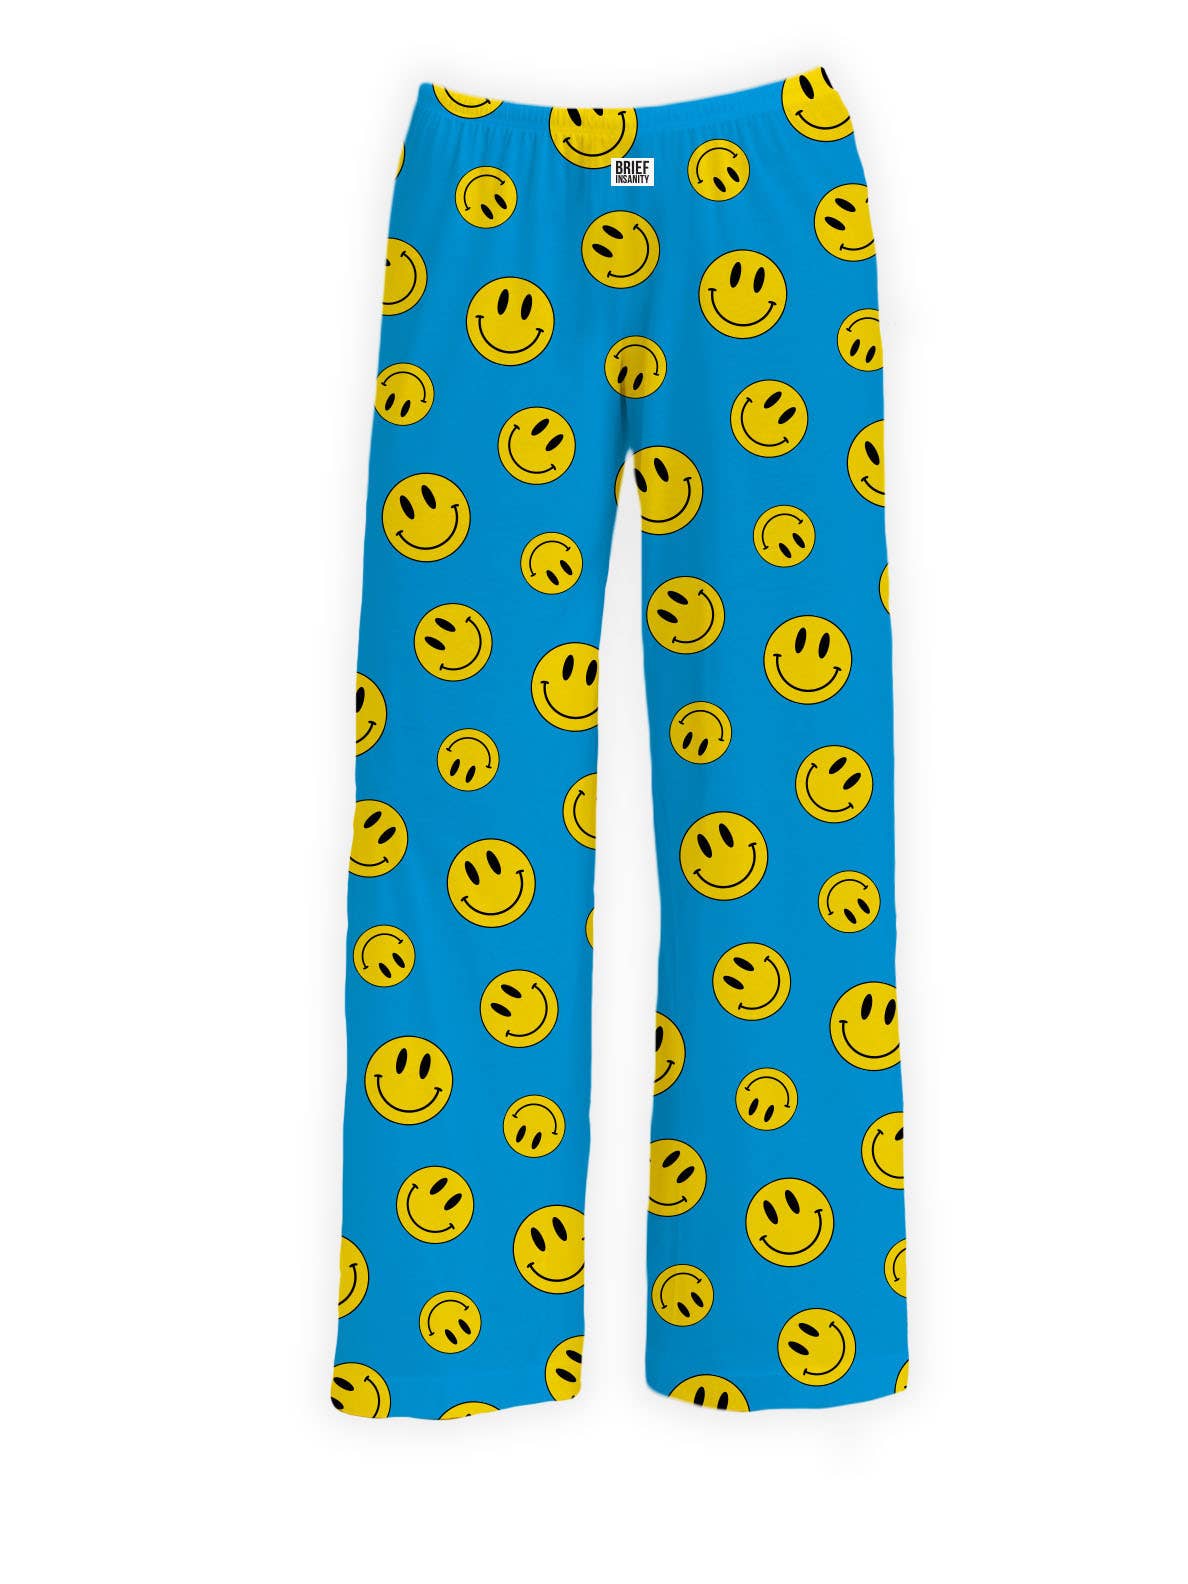 Light blue unisex lounge pants covered in smiley faces, showcasing the breathale, lightweight polyester fabric designed for ultimate comfort.